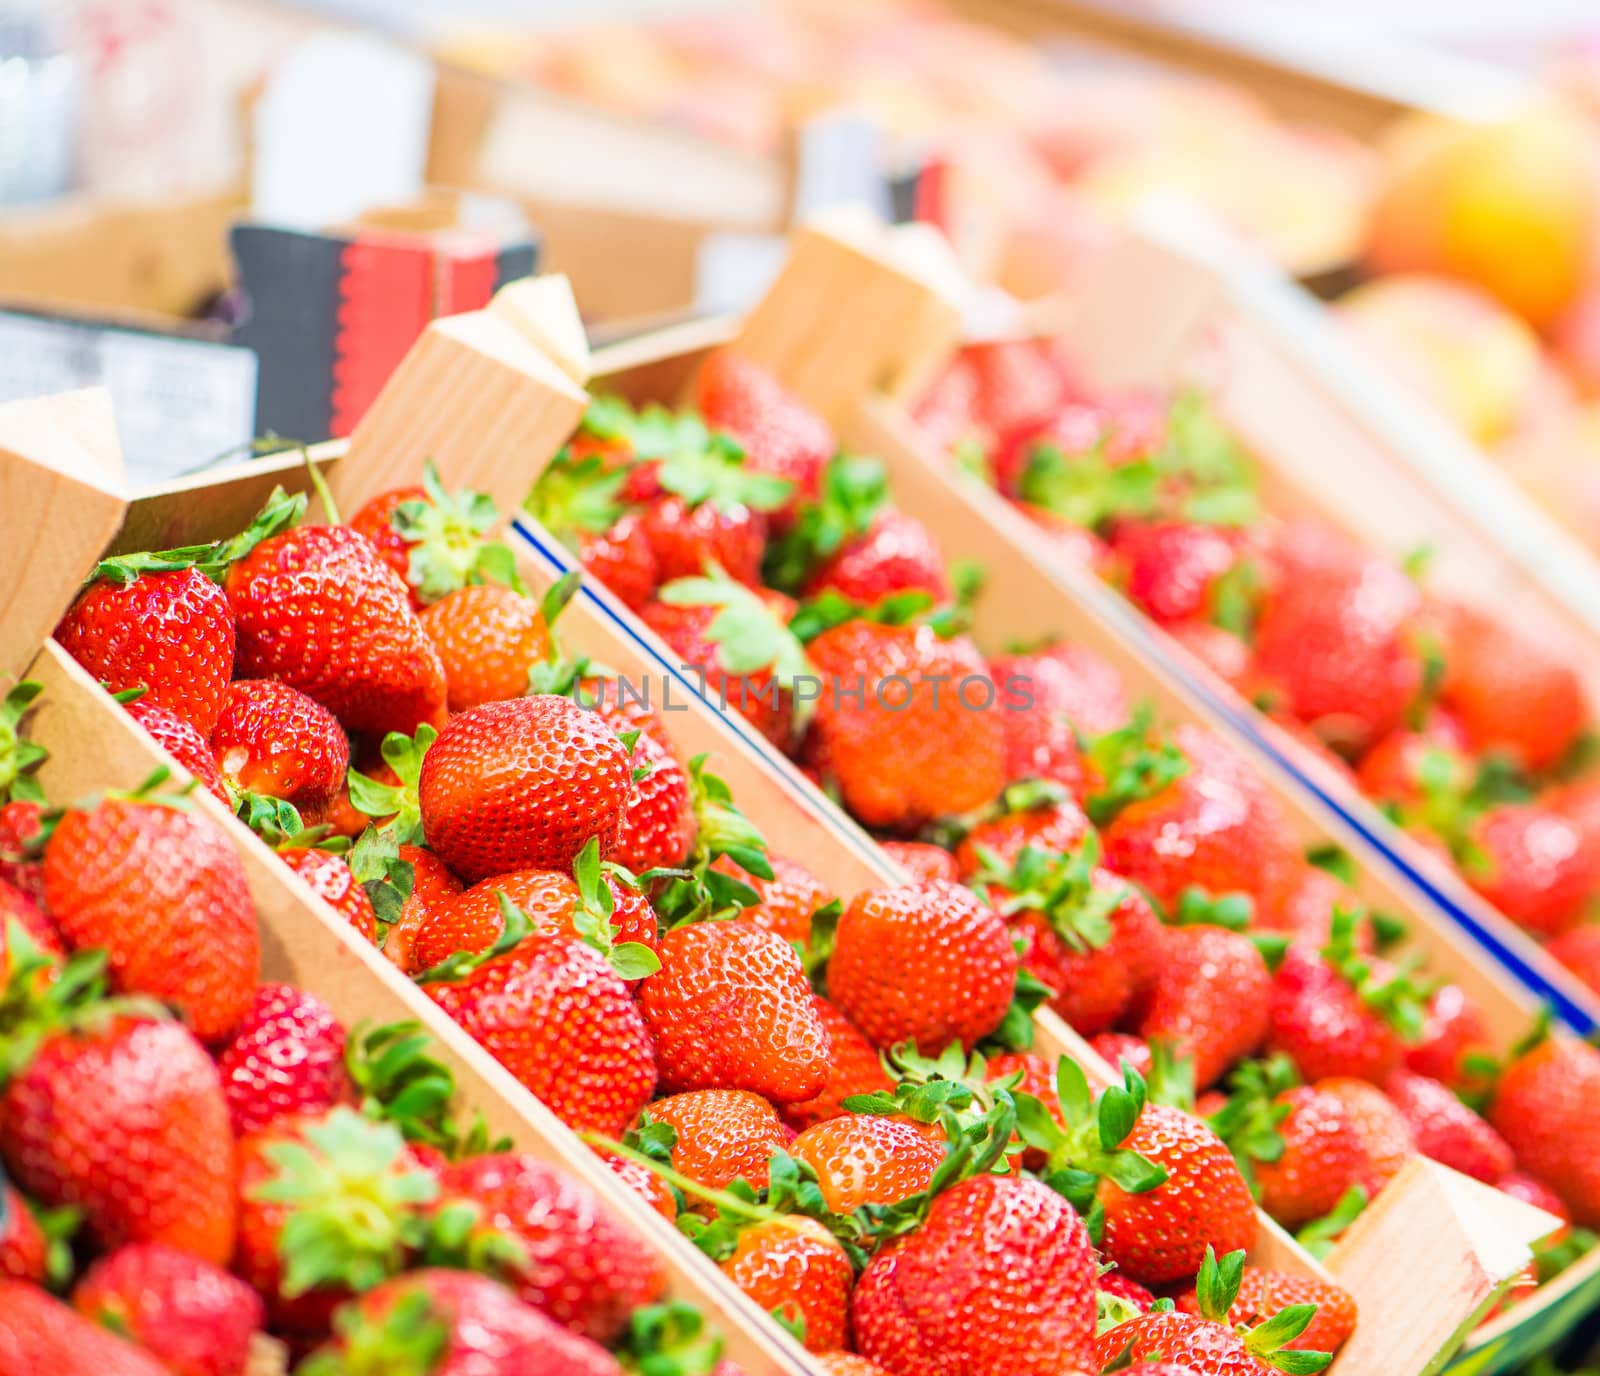 Strawberries in boxes on the market